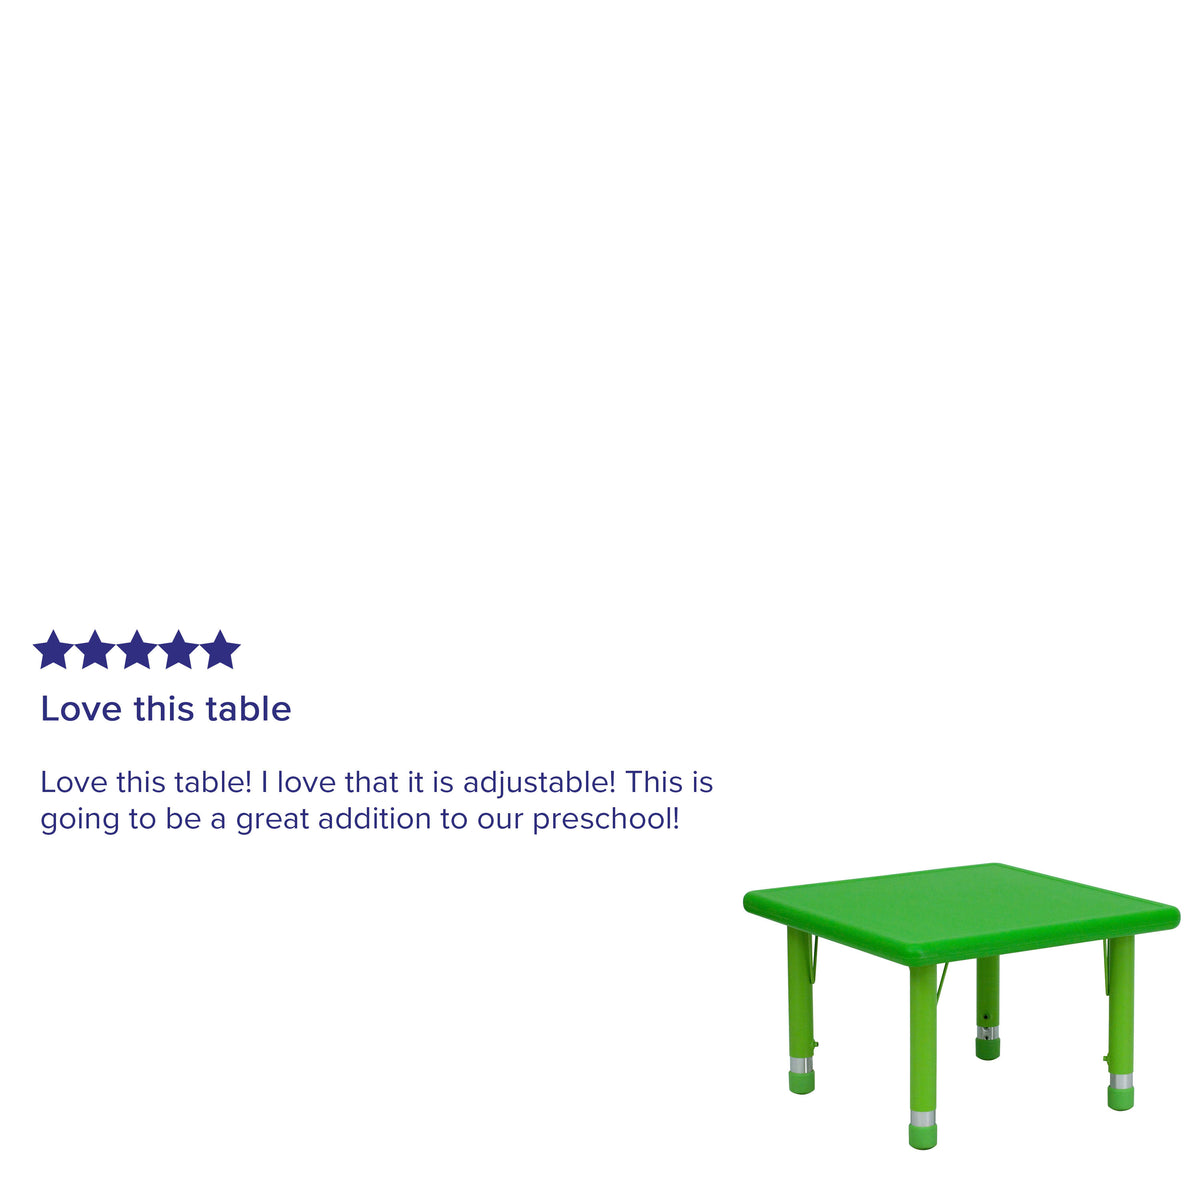 Green |#| 24inch Square Green Plastic Height Adjustable Activity Table